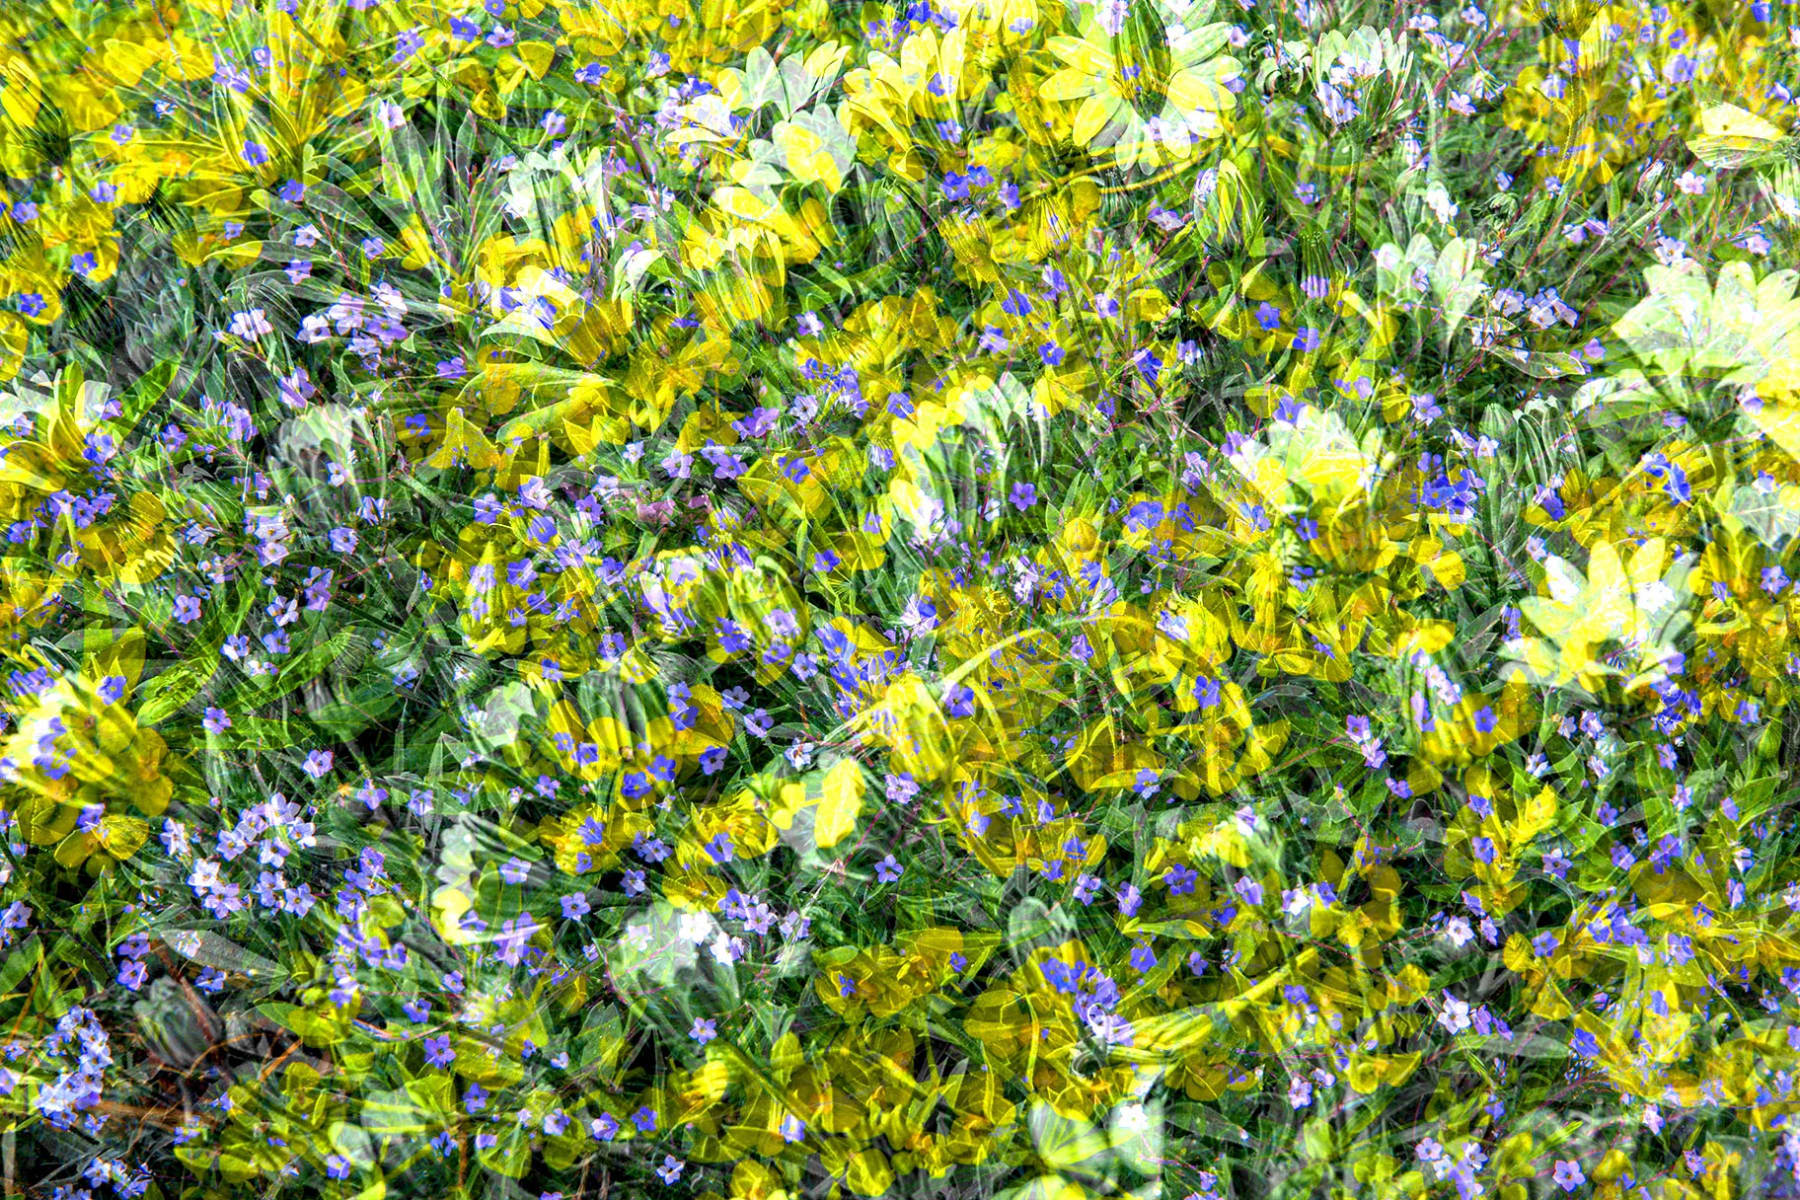 Pushing Up Daisies Archival Pigment Print Limited Edition 20 82.5 x 55 cm $1400 Limited Edition 12 130 x 86.6 cm $1800 Limited Edition 6 150 x 100 cm $2000